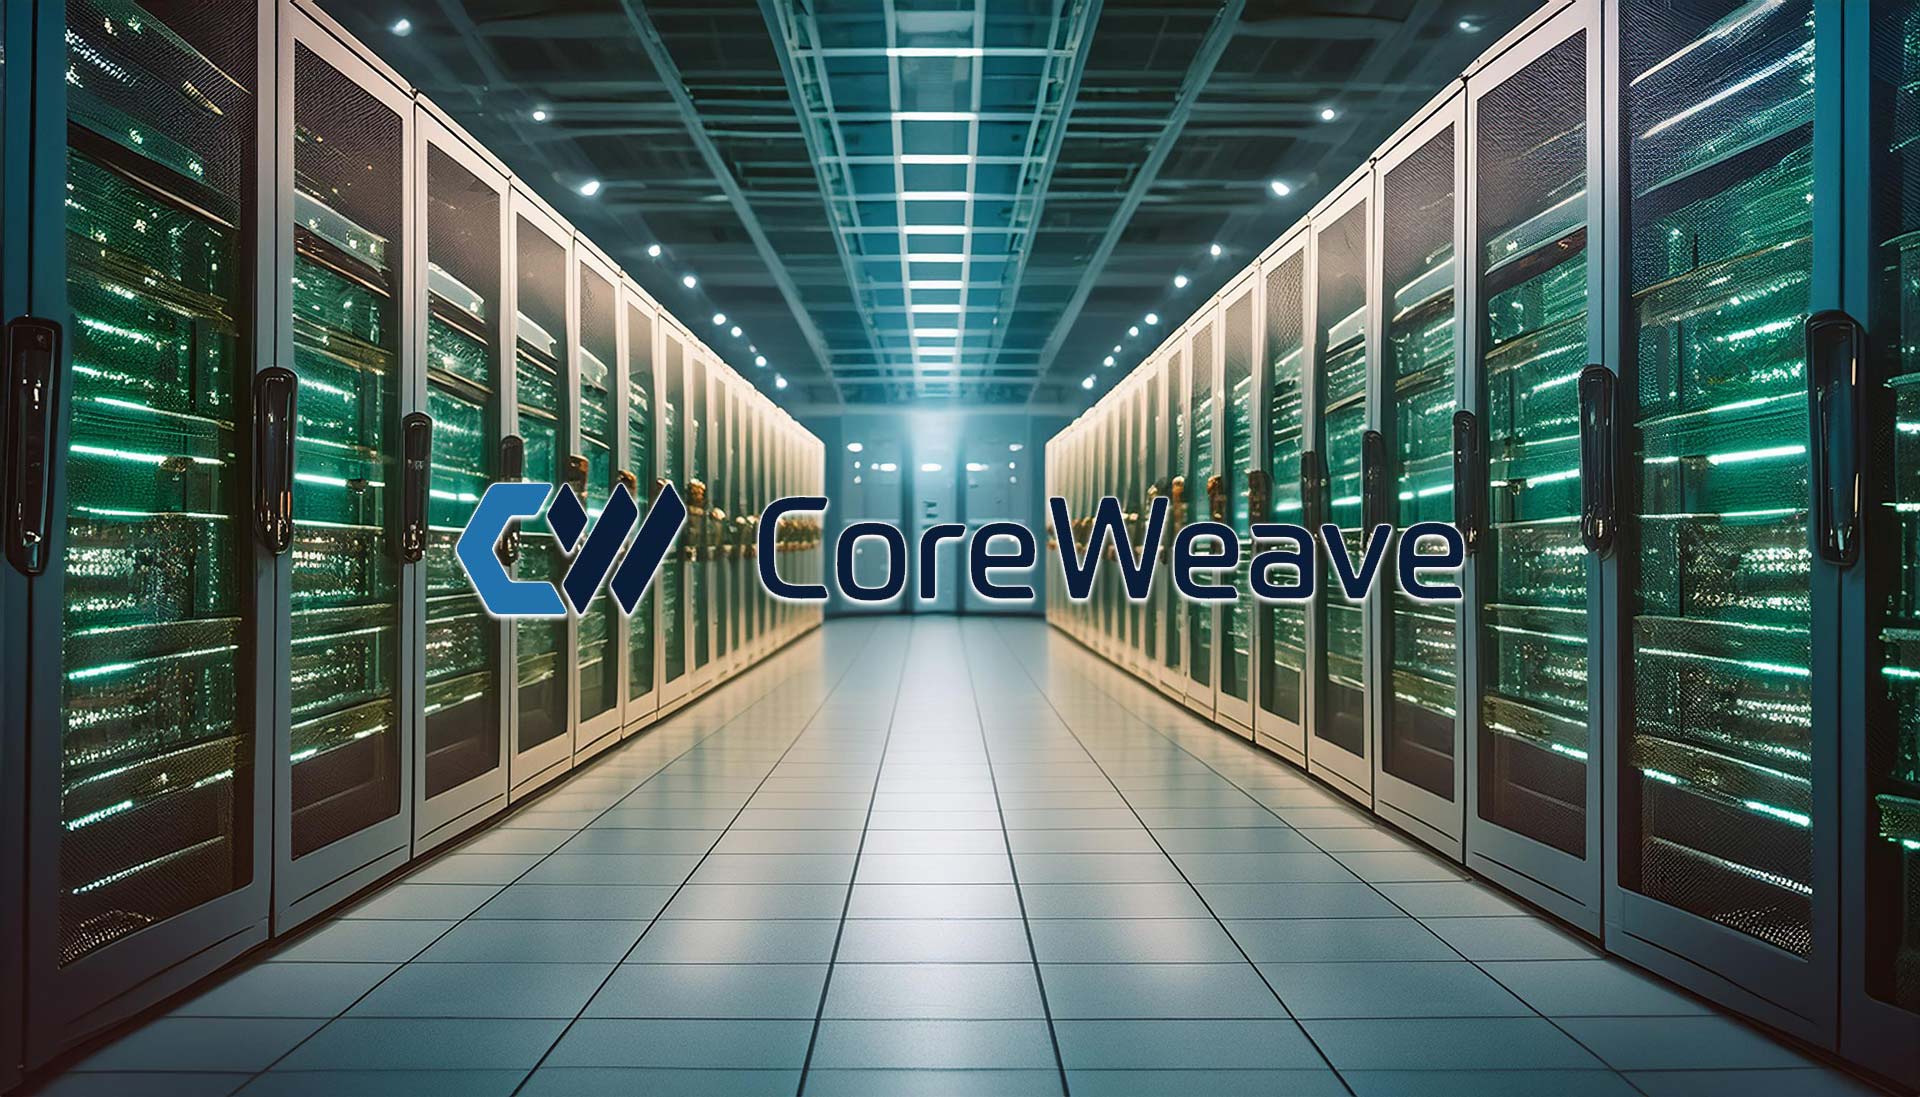 CoreWeave raises $1.1B to expand its GPU cloud infrastructure network